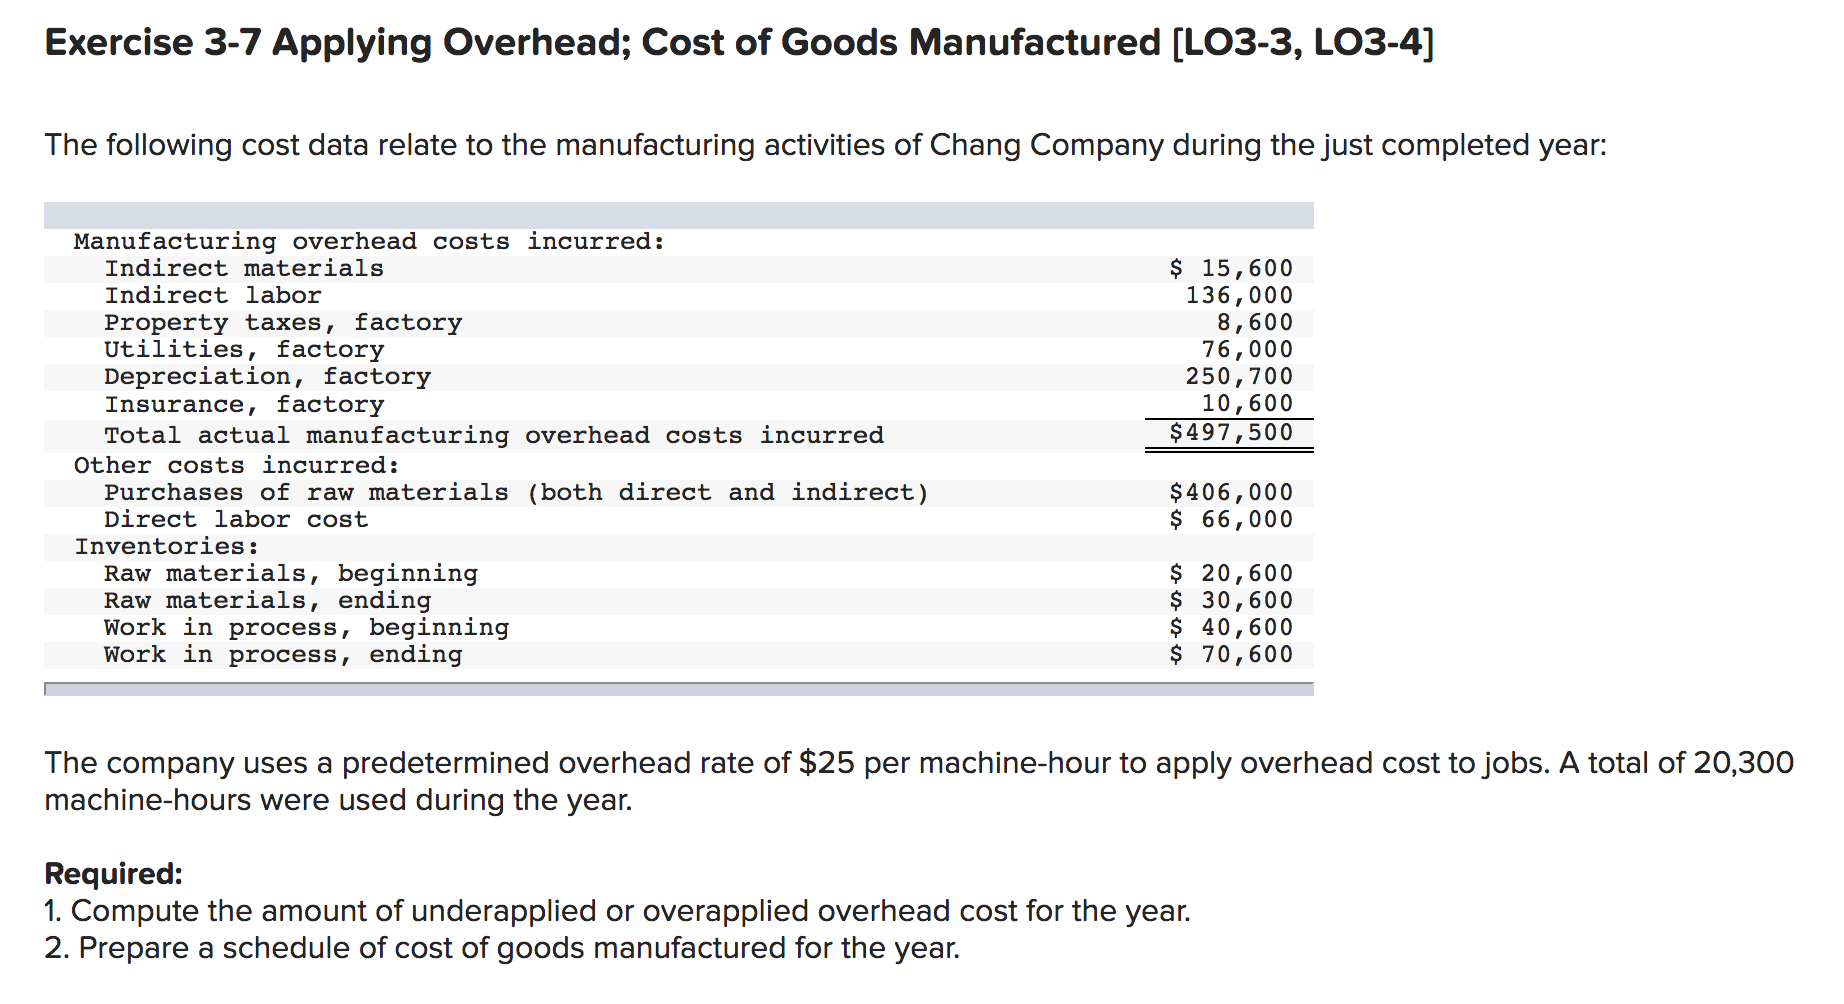 Exercise 3-7 Applying Overhead; Cost of Goods Manufactured [LO3-3, LO3-4]
The following cost data relate to the manufacturing activities of Chang Company during the just completed year:
Manufacturing overhead costs incurred:
Indirect materials
Indirect labor
$ 15,600
136,000
8,600
76,000
250,700
10,600
$497,500
Property taxes, factory
Utilities, factory
Depreciation, factory
Insurance, factory
Total actual manufacturing overhead costs incurred
Other costs incurred:
Purchases of raw materials (both direct and indirect)
Direct labor cost
Inventories:
Raw materials, beginning
Raw materials, ending
Work in process, beginning
Work in process, ending
$406,000
$ 66,000
$ 20,600
$ 30,600
$ 40,600
$ 70,600
The company uses a predetermined overhead rate of $25 per machine-hour to apply overhead cost to jobs. A total of 20,300
machine-hours were used during the year.
Required:
1. Compute the amount of underapplied or overapplied overhead cost for the year.
2. Prepare a schedule of cost of goods manufactured for the year.
